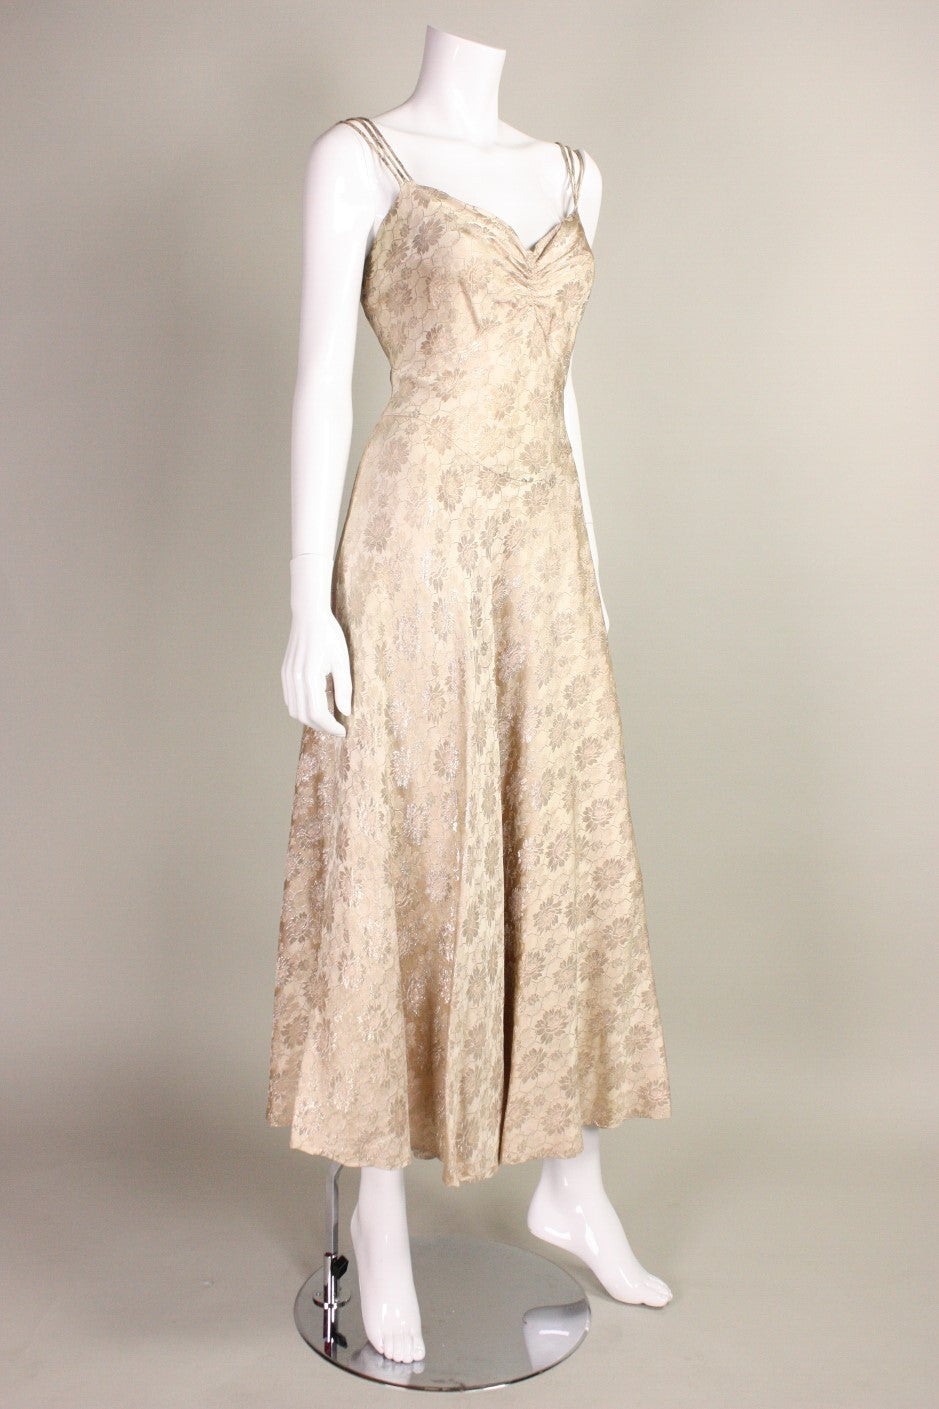 Vintage dress dates to the 1930's and is made of a cream lamé with a light pink hue.  Fabric has a floral & honeycomb pattern.  Front v-neck has gathering at center front bust.  Triple spaghetti straps.  Side snap closure.  Unlined.

No size